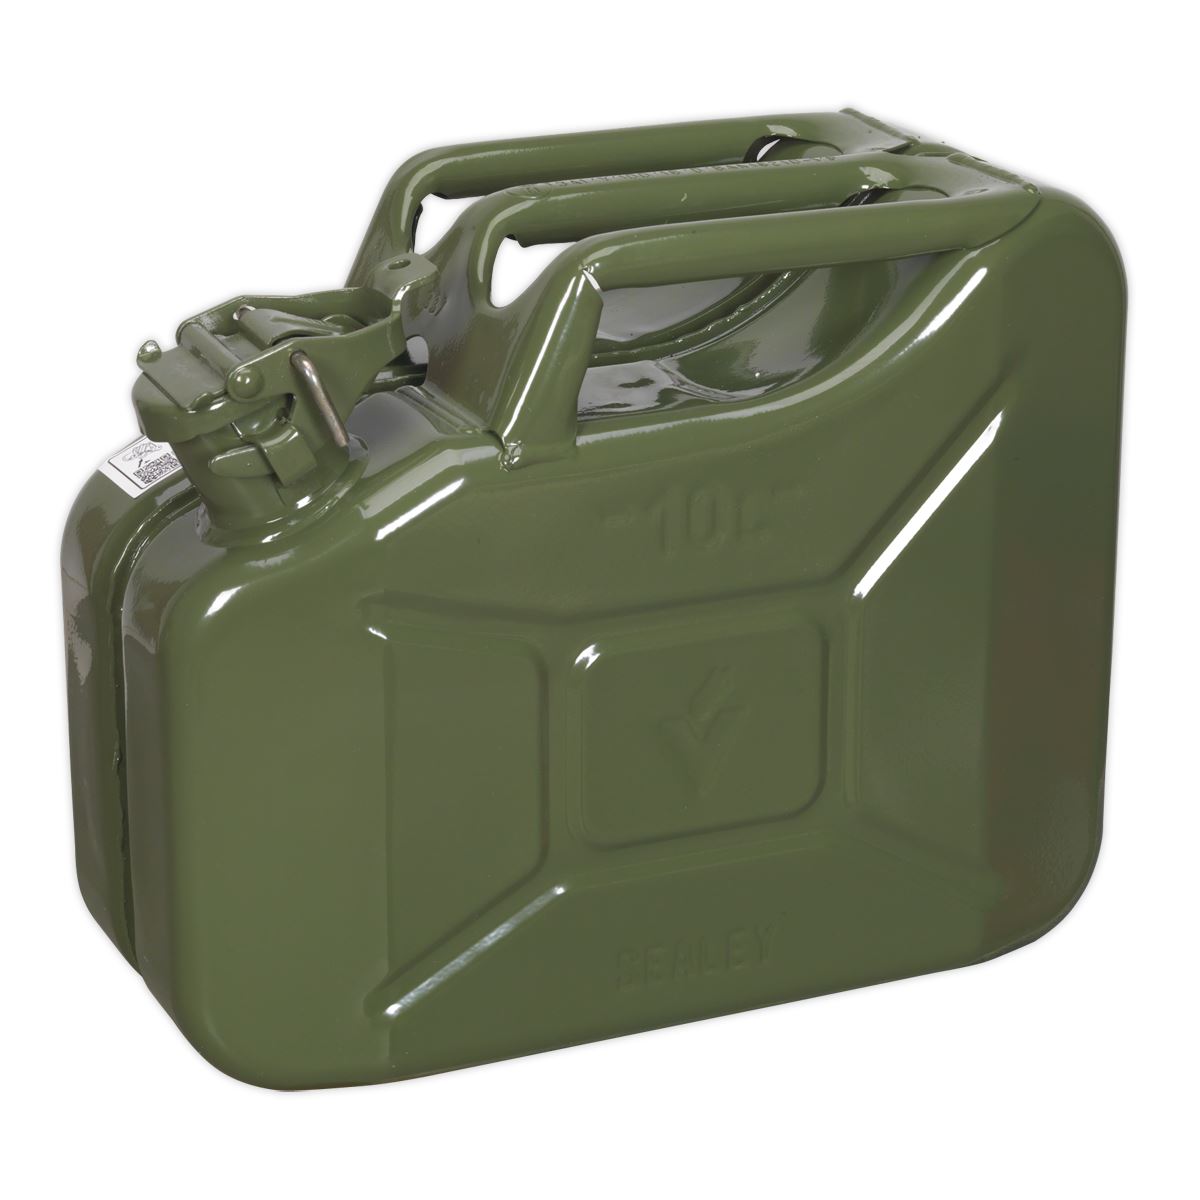 Sealey Jerry Can 10L Green Fuel Tank